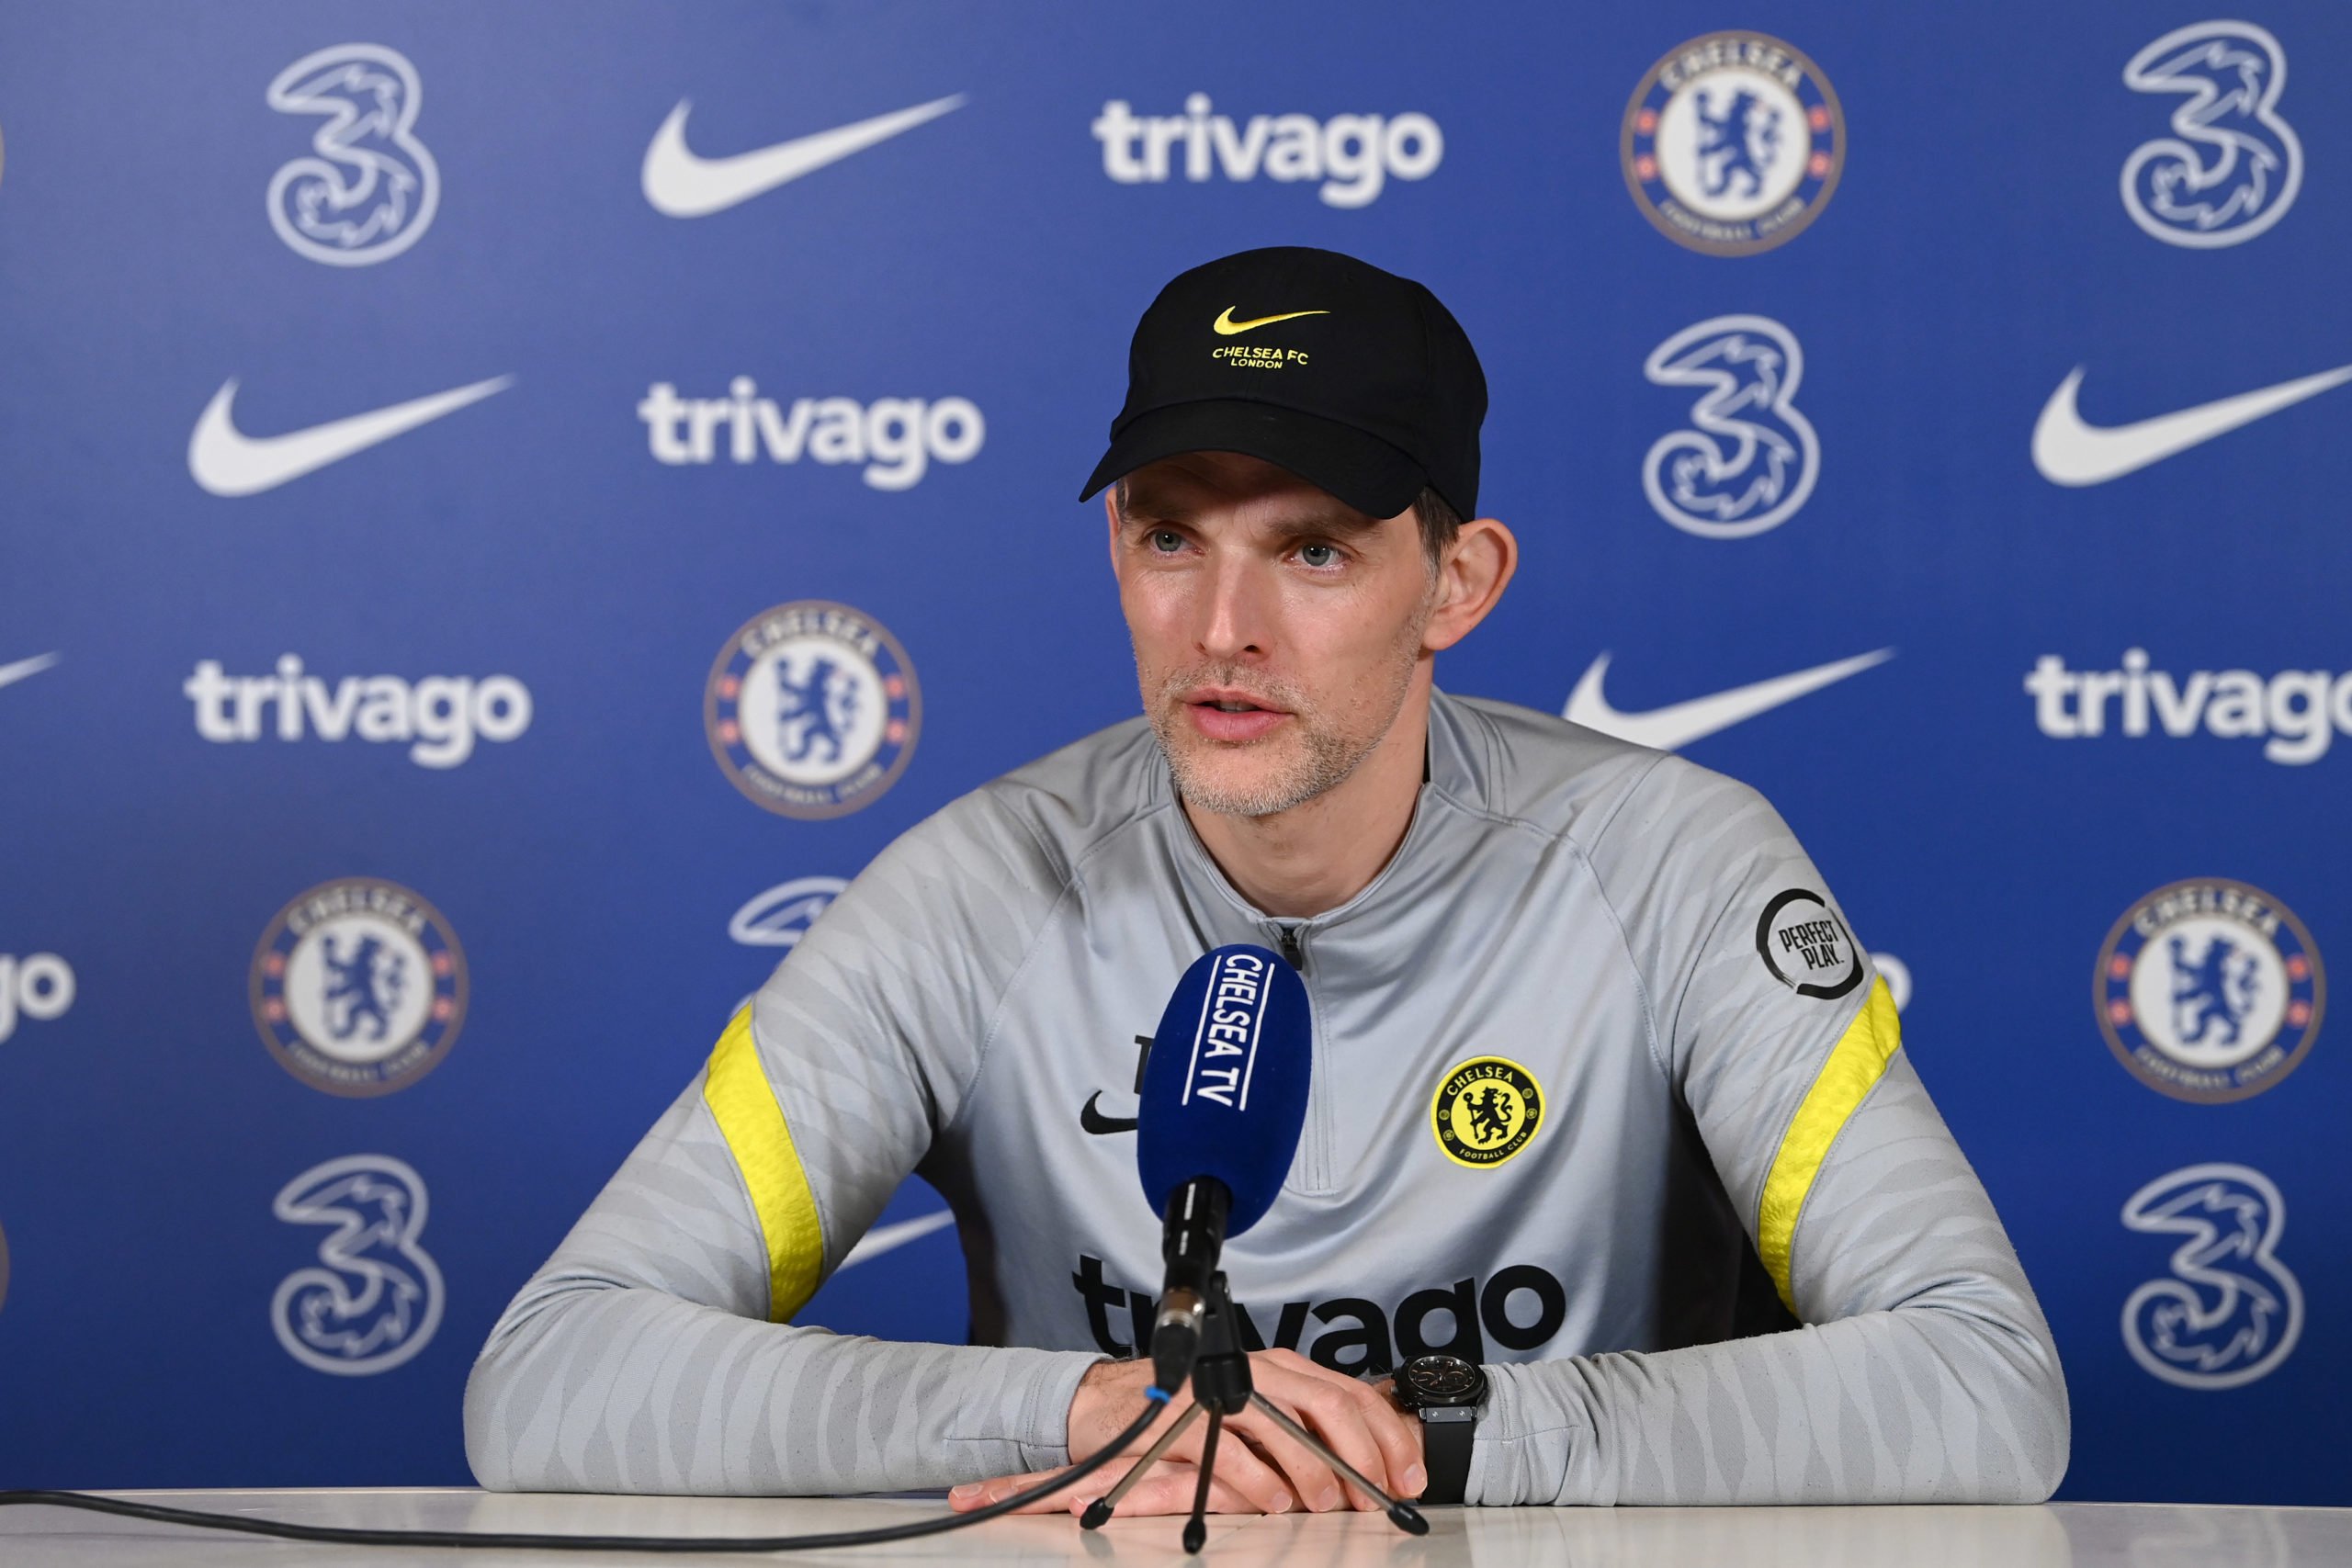 ‘Very strange’: BBC pundit baffled by what he’s been hearing from Thomas Tuchel